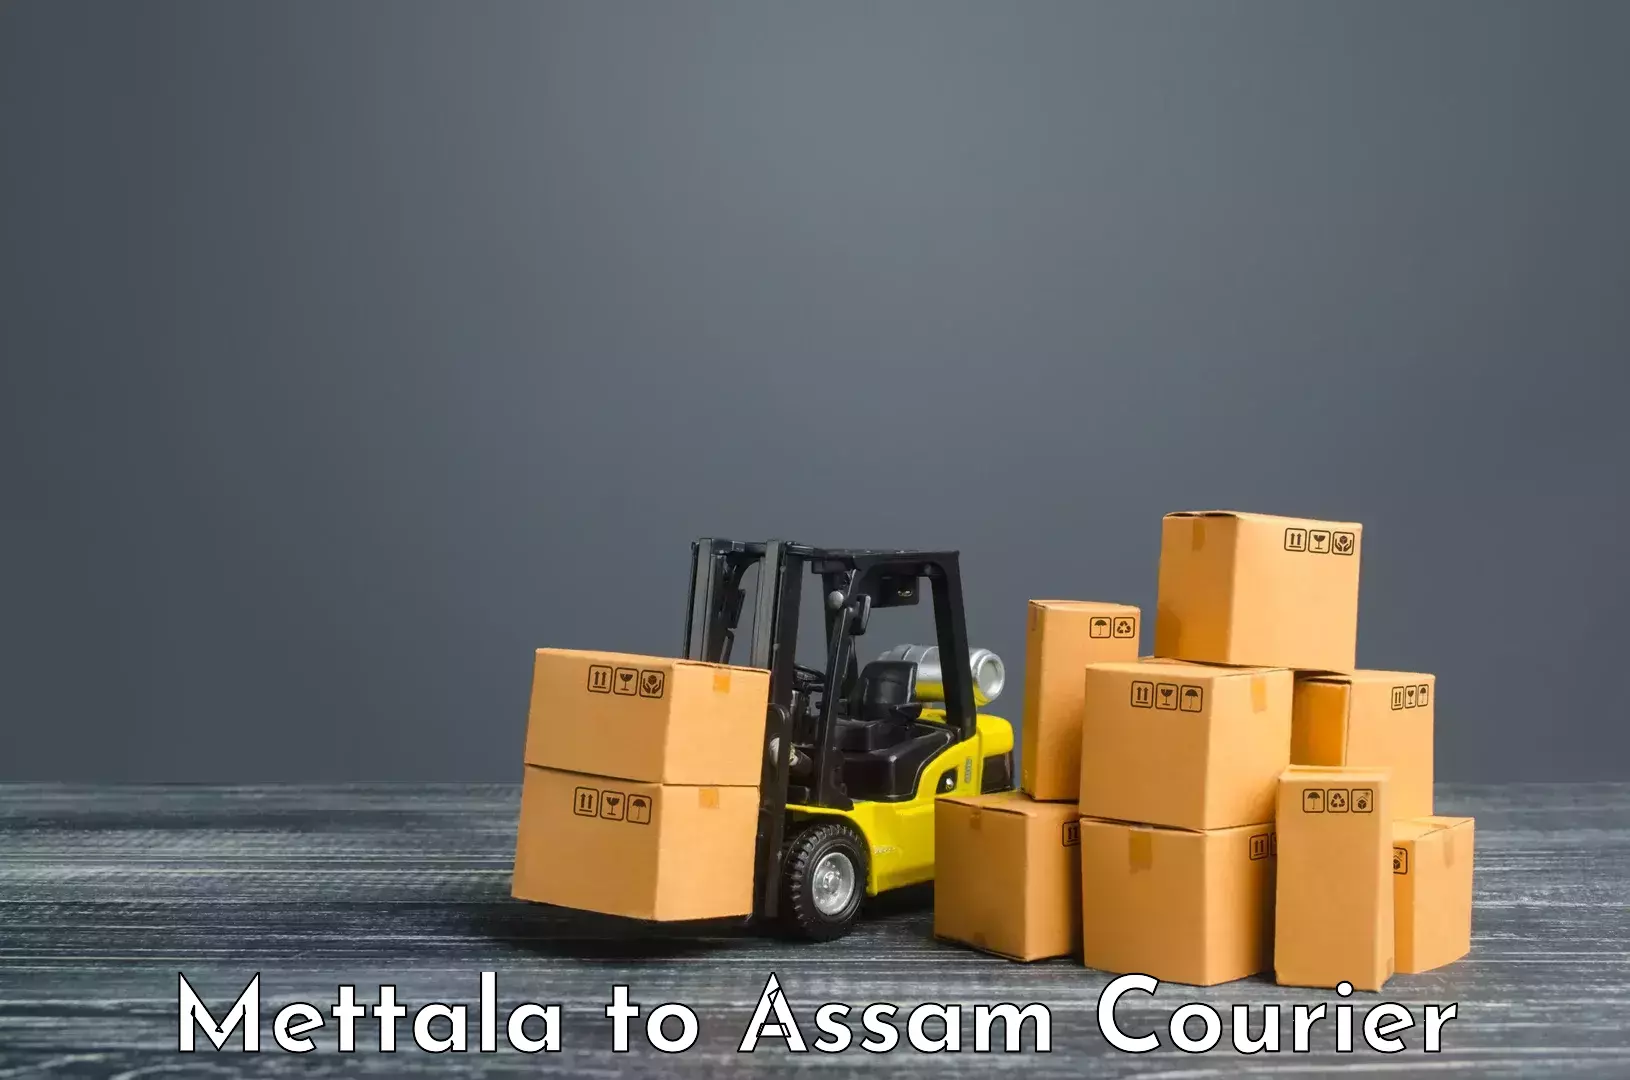 24-hour courier service Mettala to Tihu